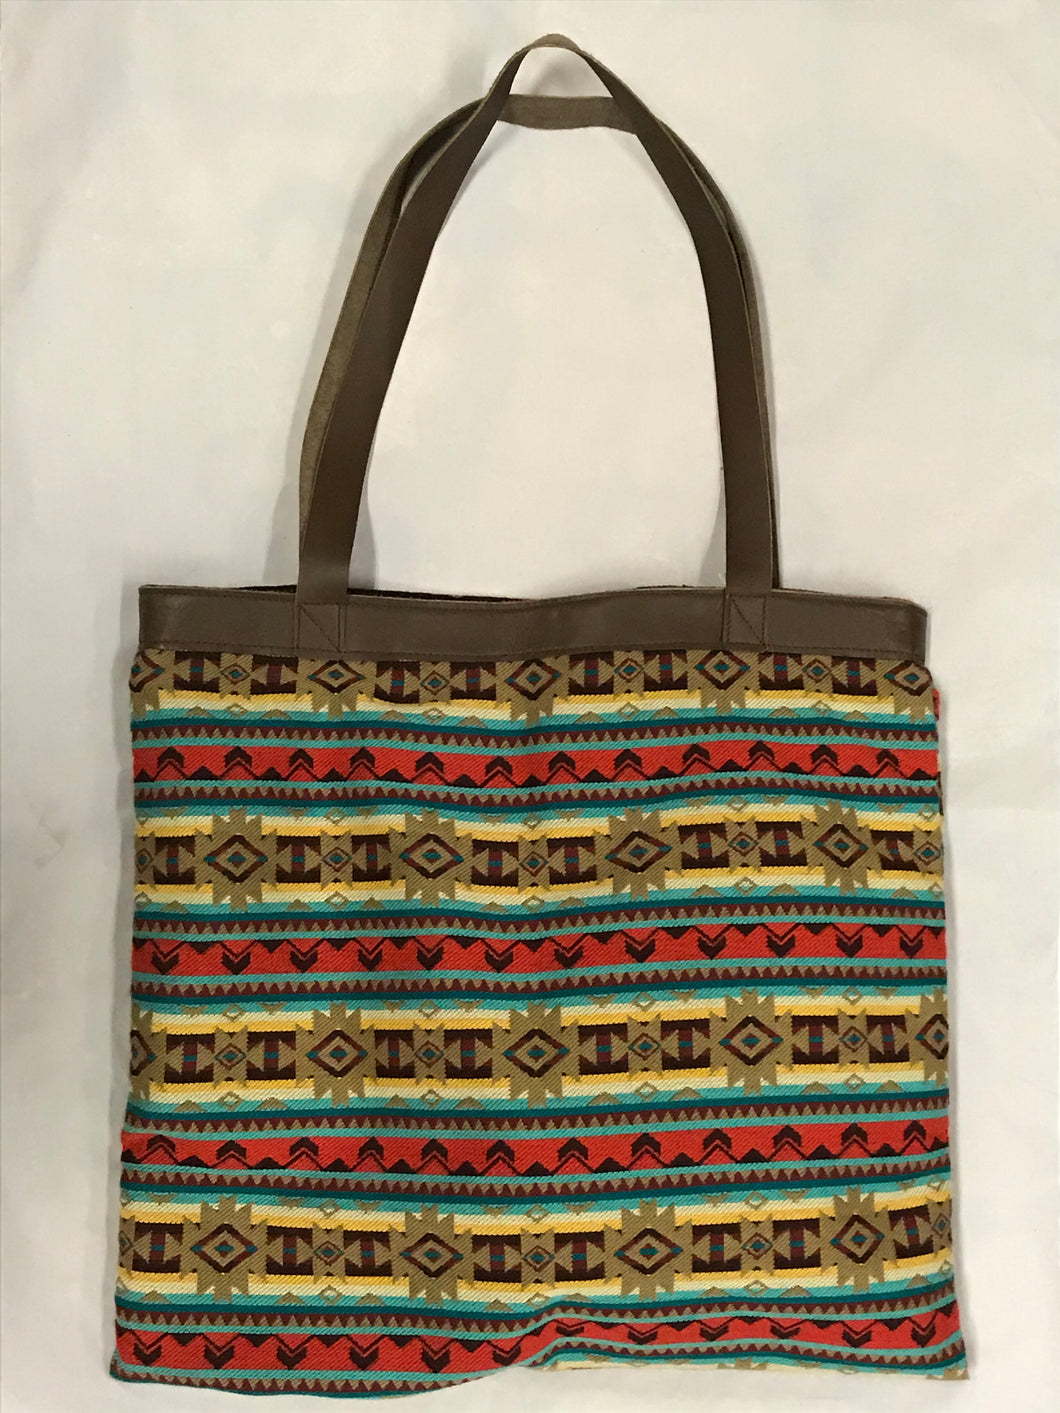 Cream, Teal, and Red Striped Woven XL Tote Bag